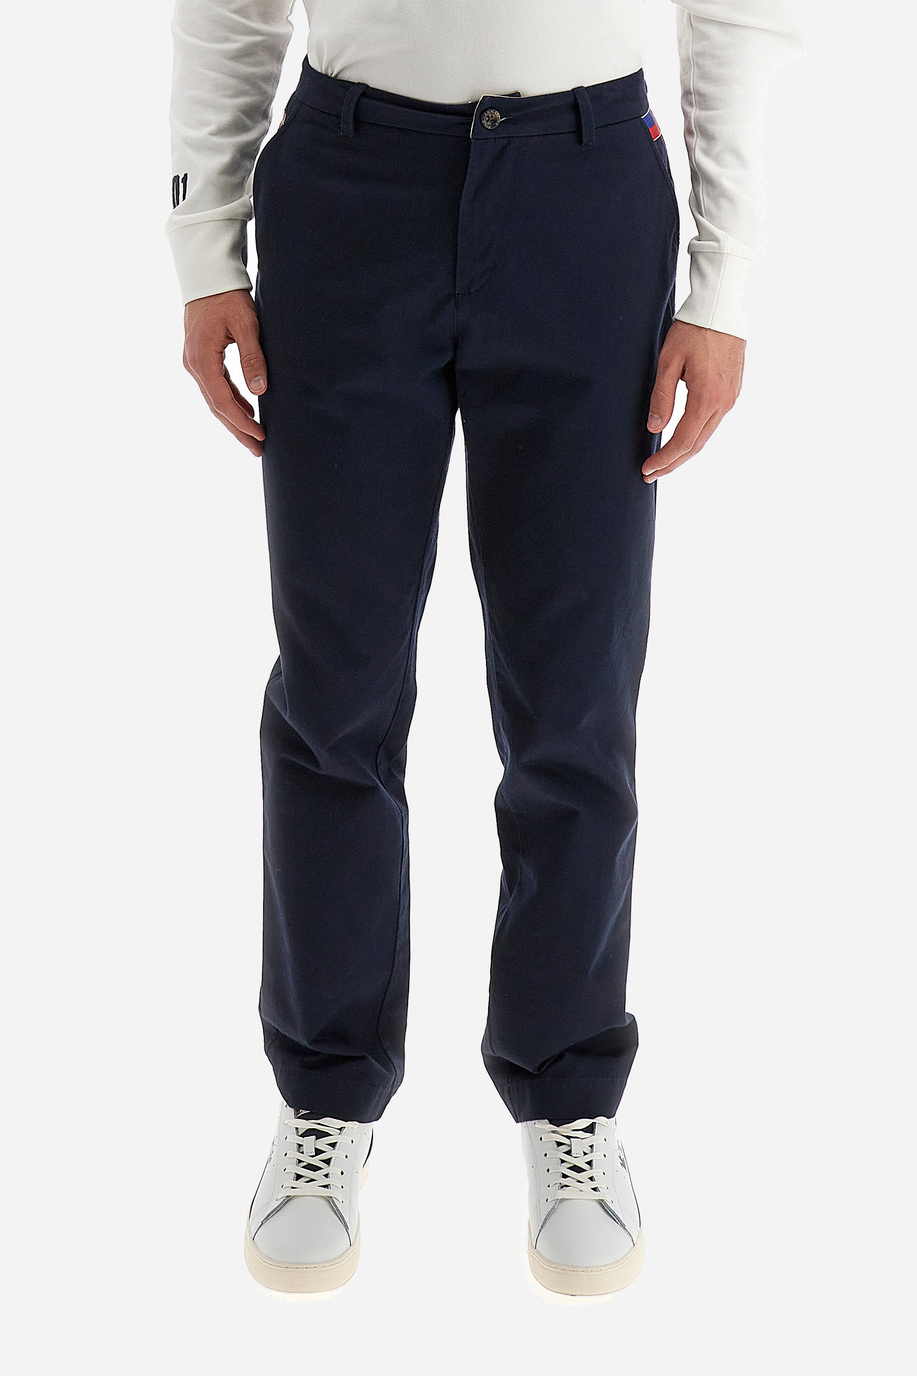 Men's chinos with a regular fit - Wernher - New Arrivals | La Martina - Official Online Shop